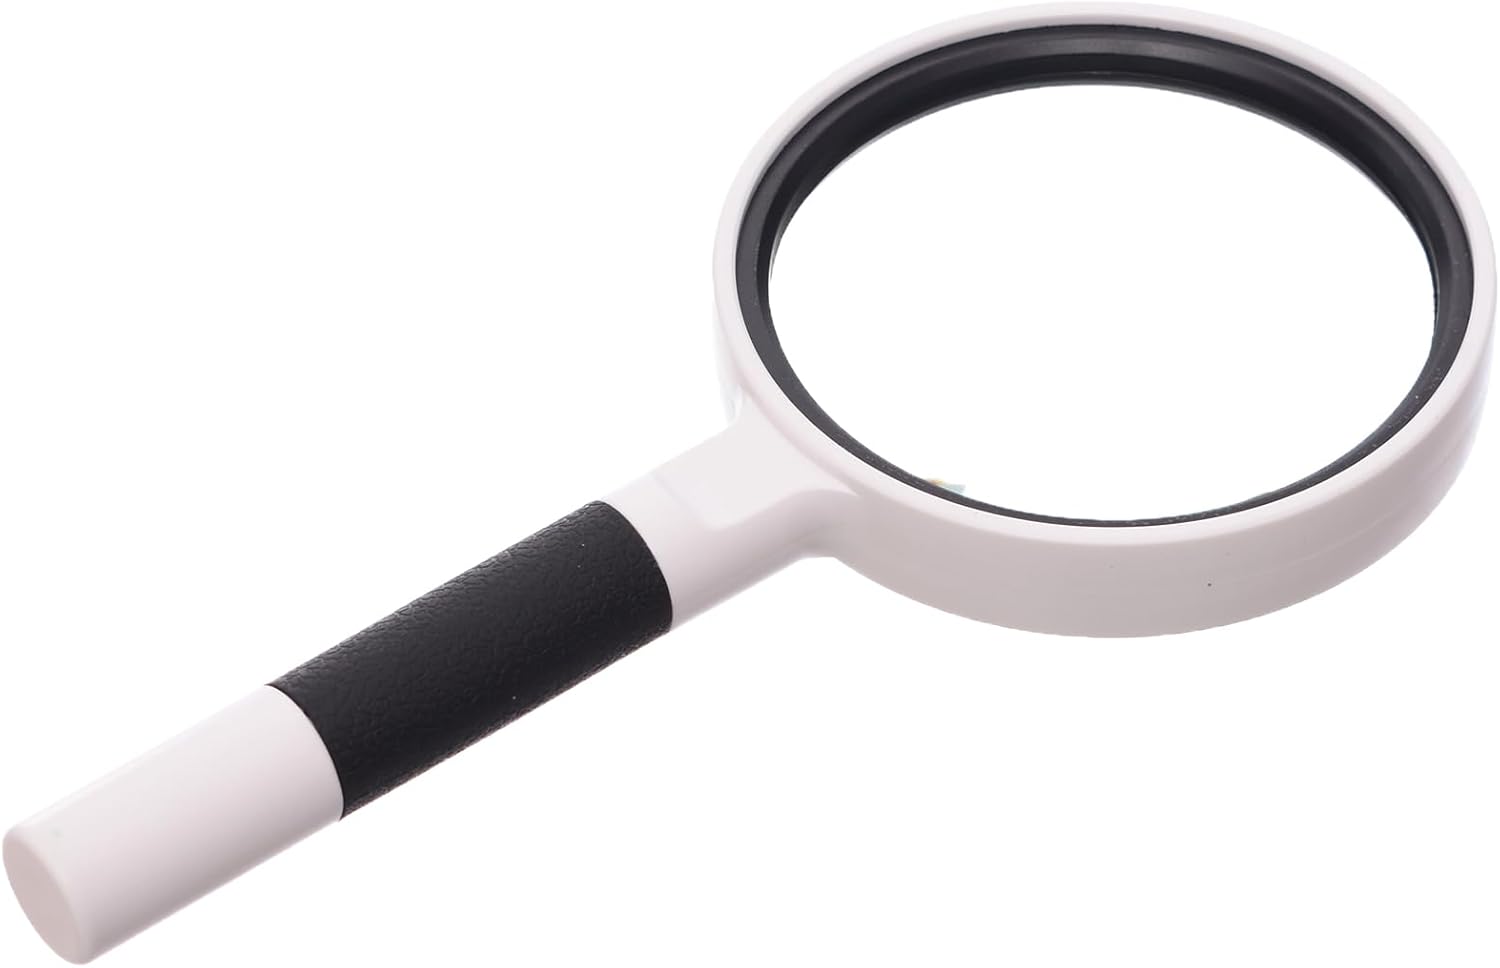 Xsmgx XSM-8075 High Quality Magnifier Size 75 mm For Office, Student - White Black